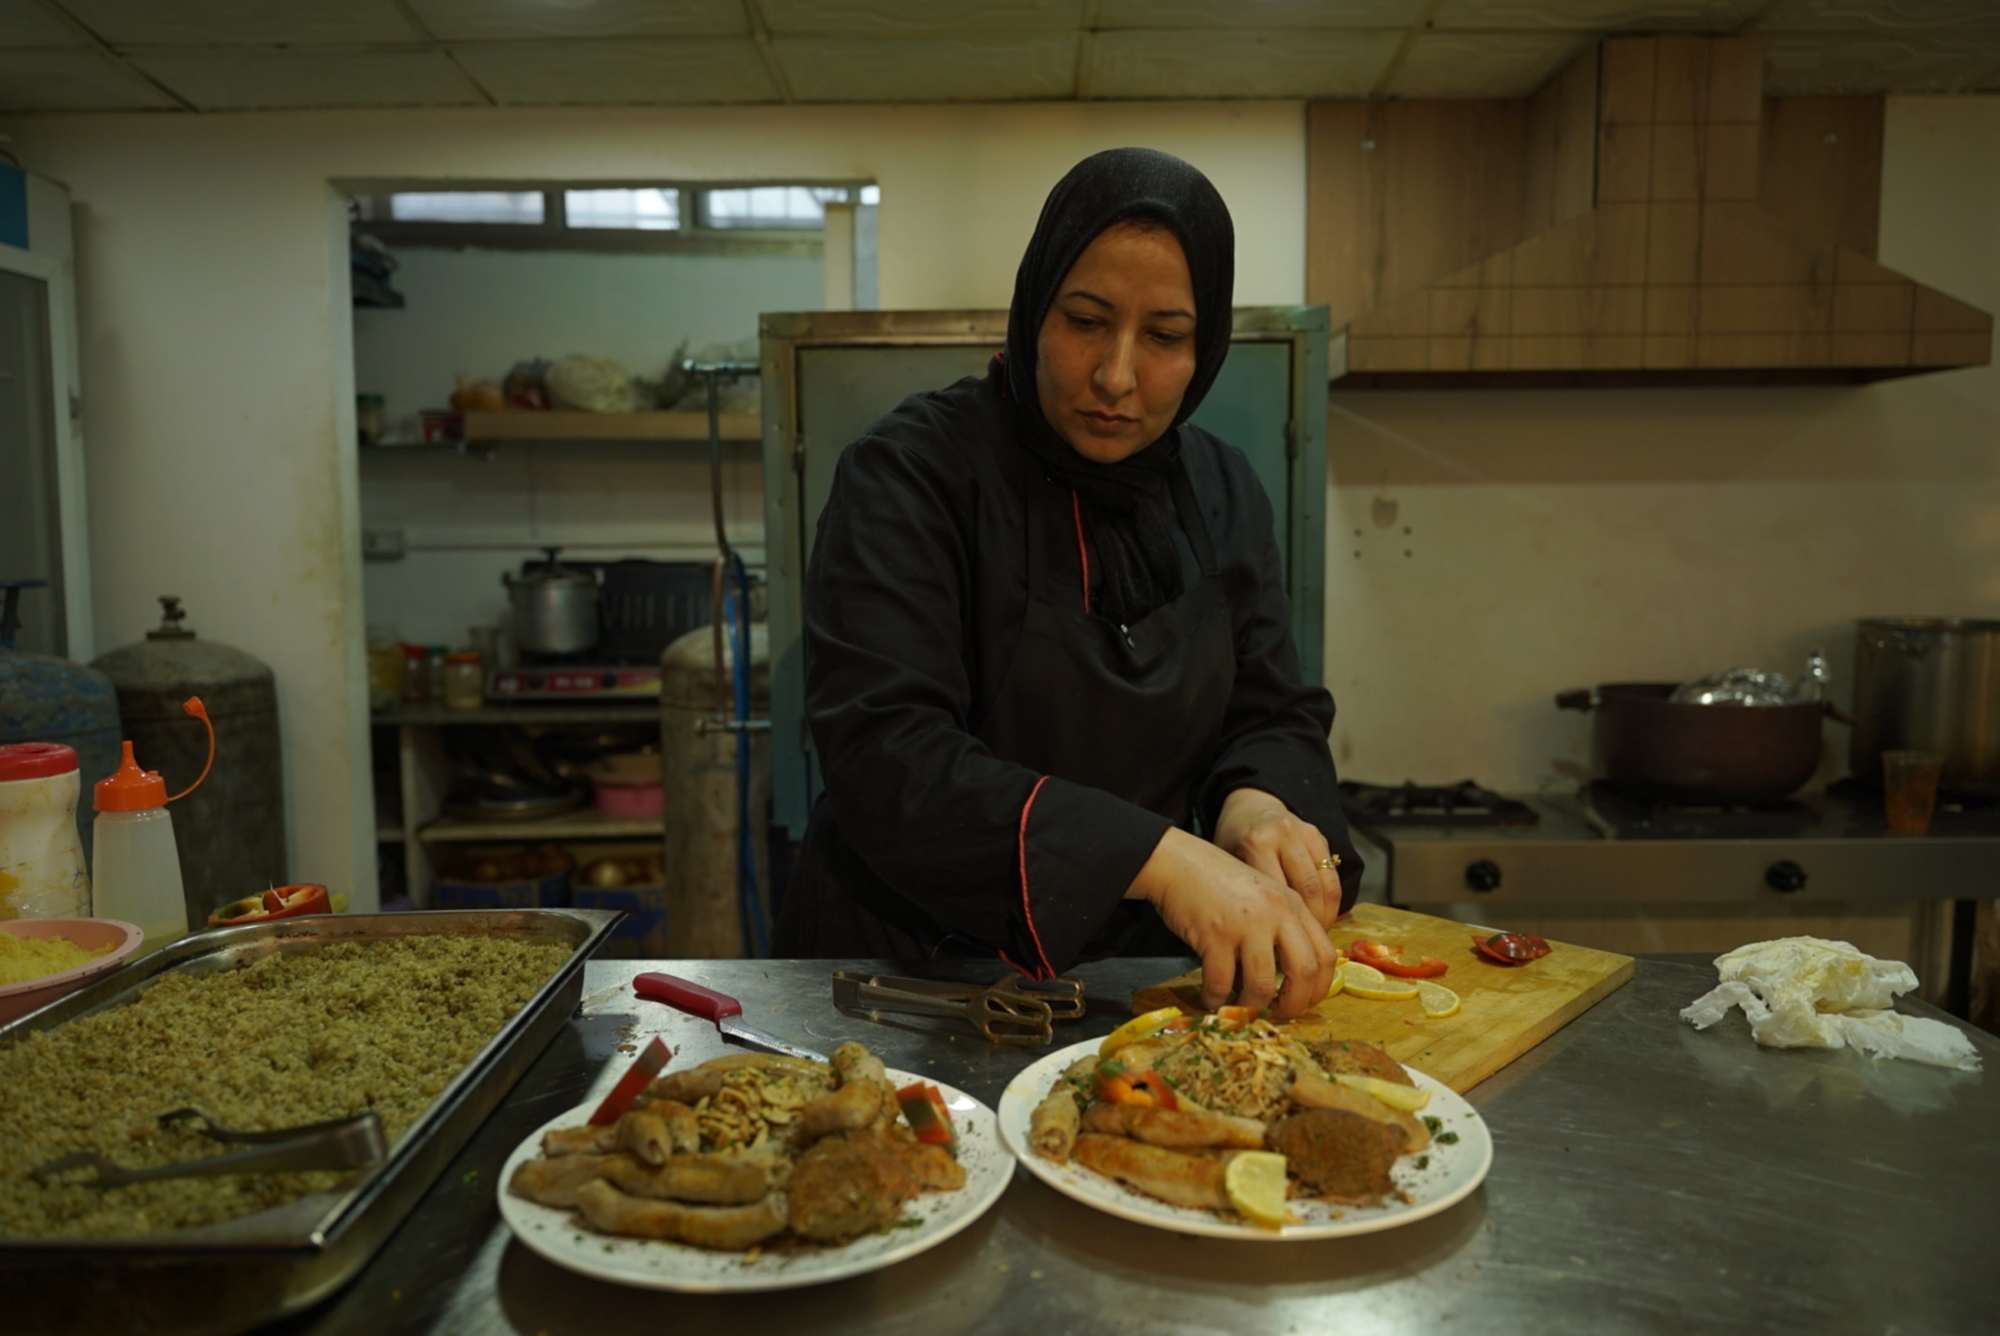 WITH HER BOOMING RESTAURANT, HADEEL CHALLENGES TRADITIONAL GENDER NORMS BY PROVIDING EMPLOYMENT FOR WOMEN IN JENIN, PALESTINE.